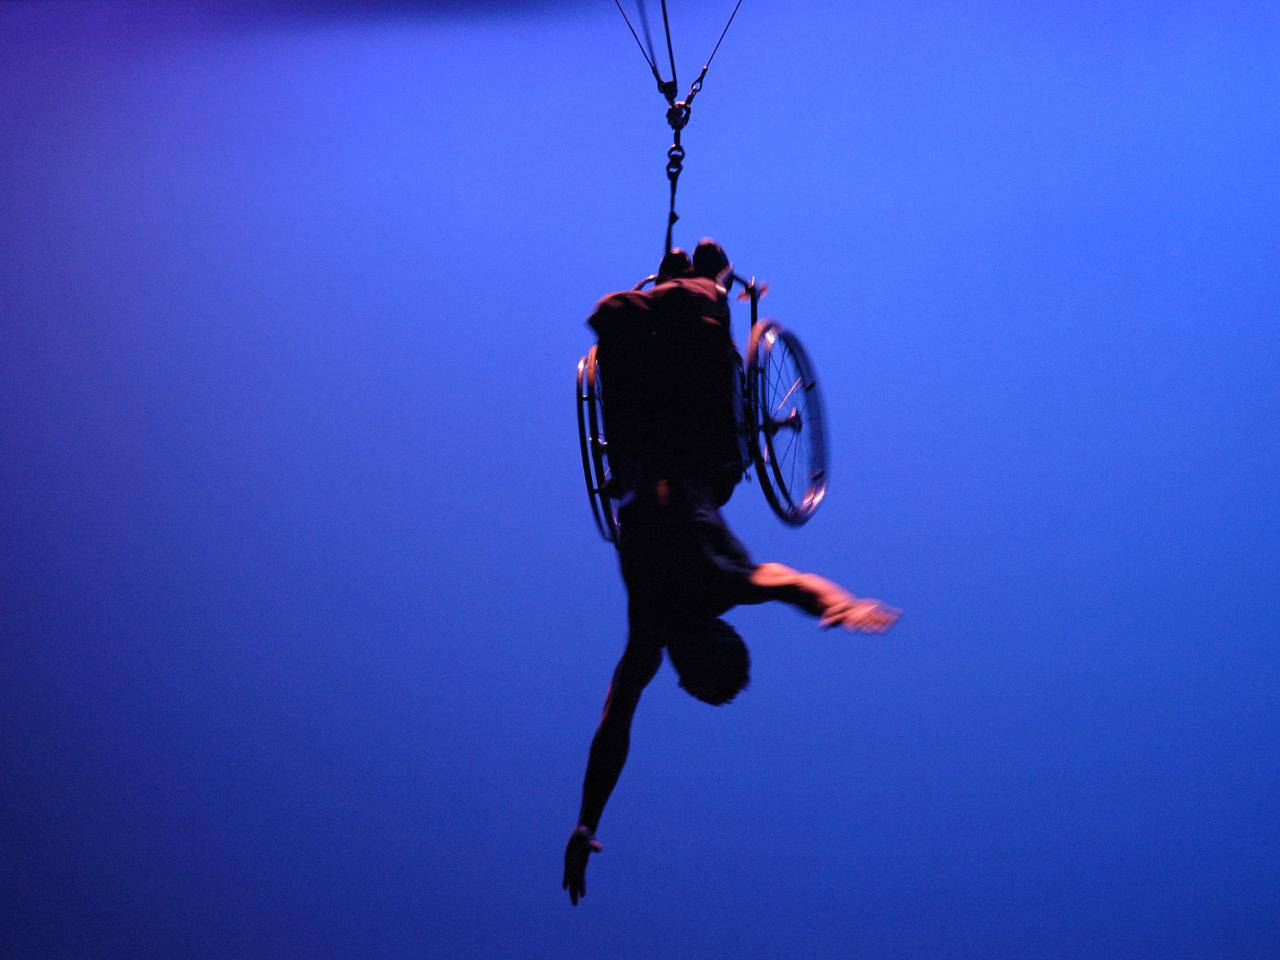 A person in a wheelchair suspended upside down with their arms extended, against a bright blue background.